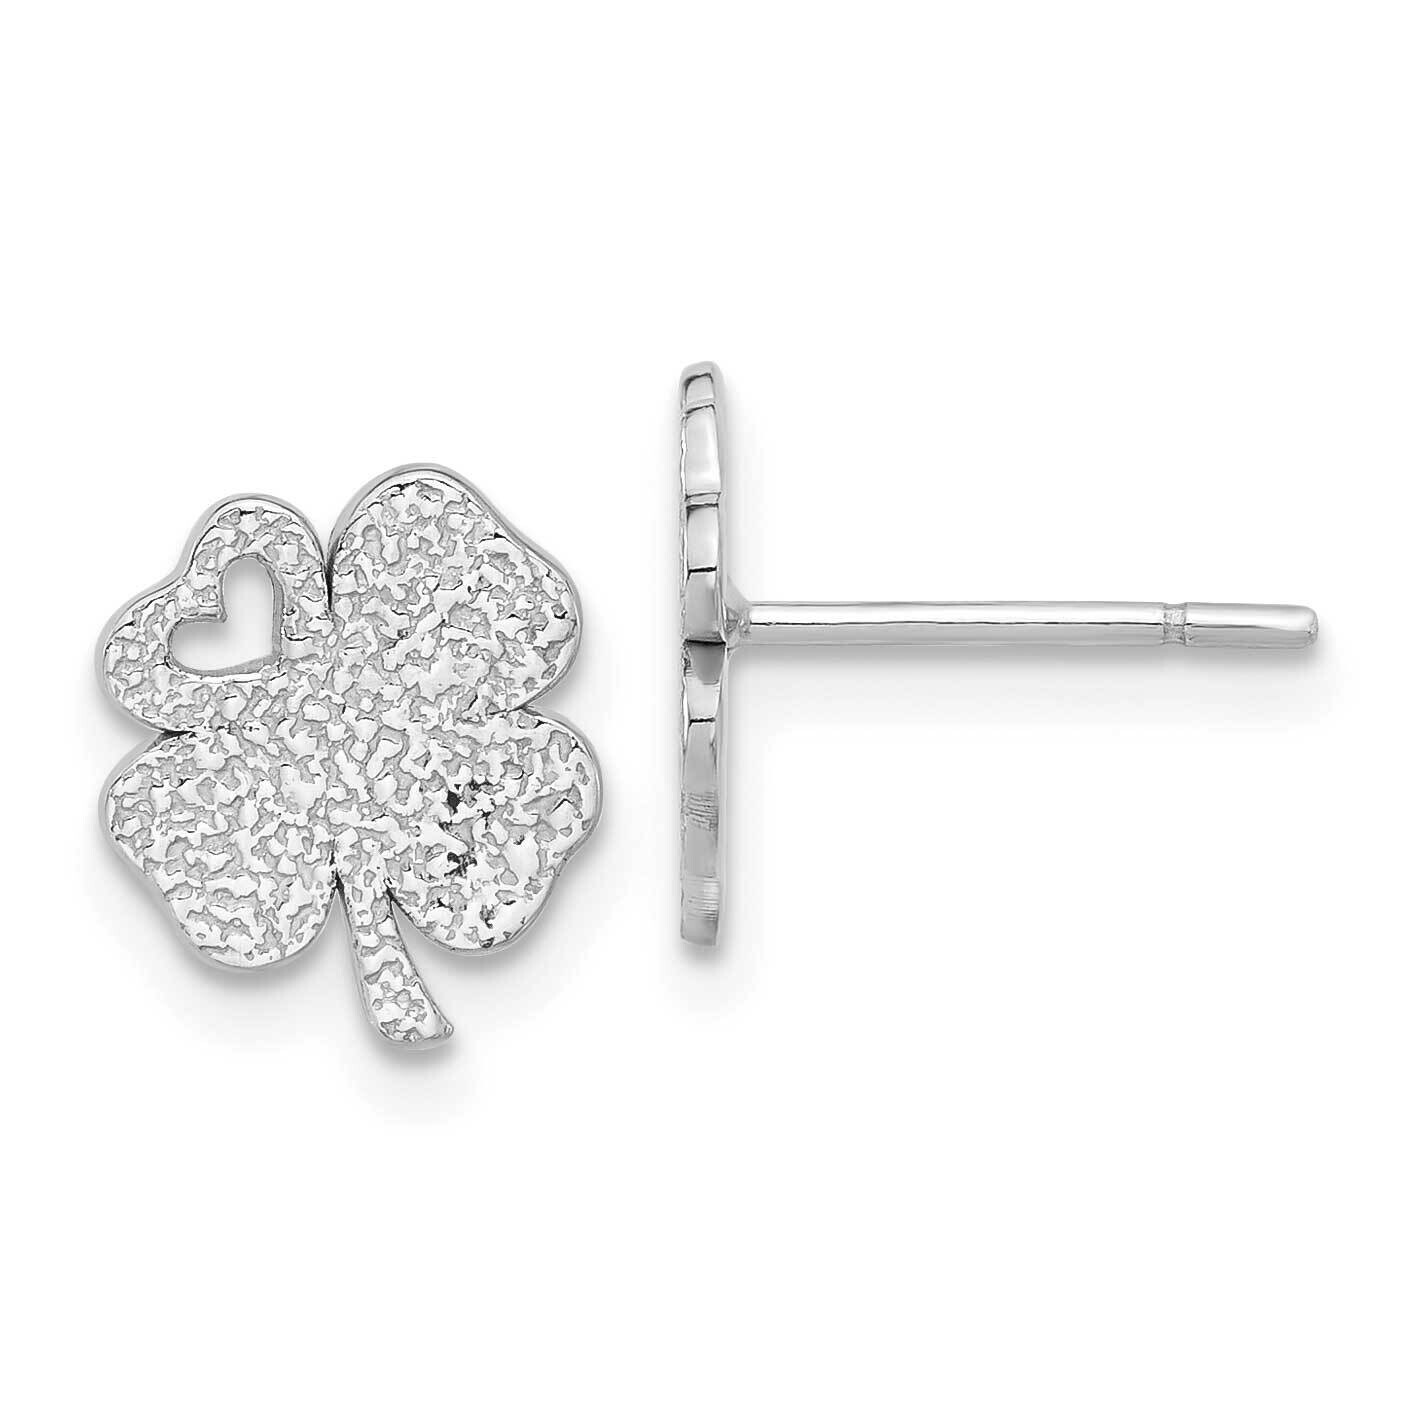 Textured Clover Post Earrings Sterling Silver Rhodium-Plated QE17603